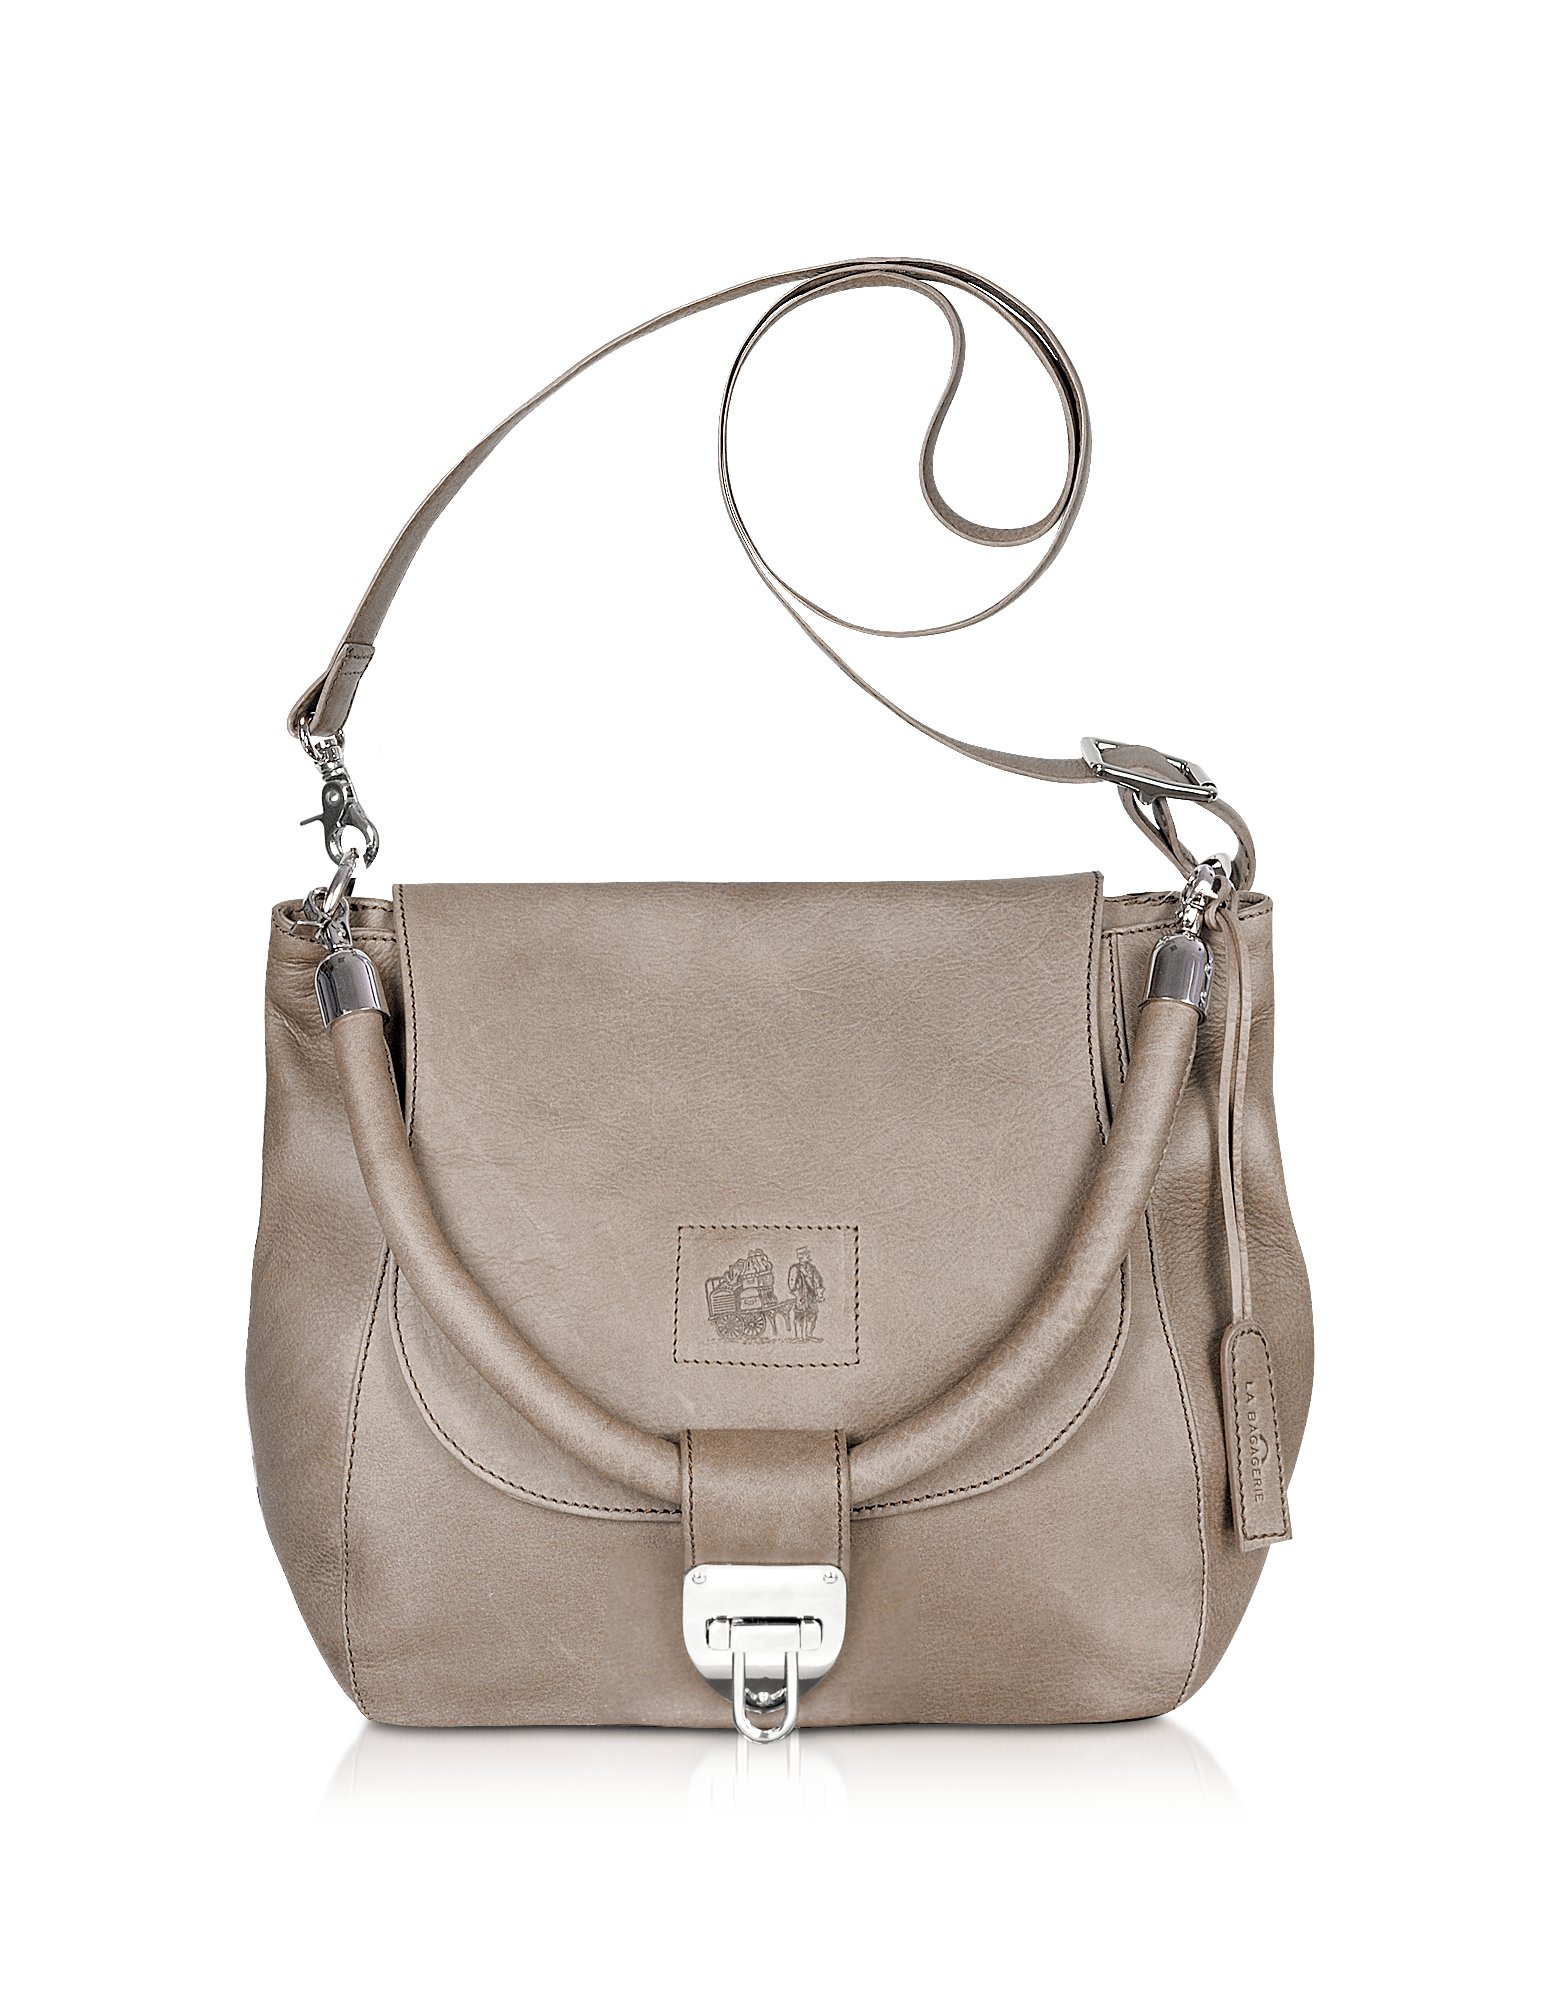 Lyst - La Bagagerie Galop Pm - Leather Shoulder Bag in Brown